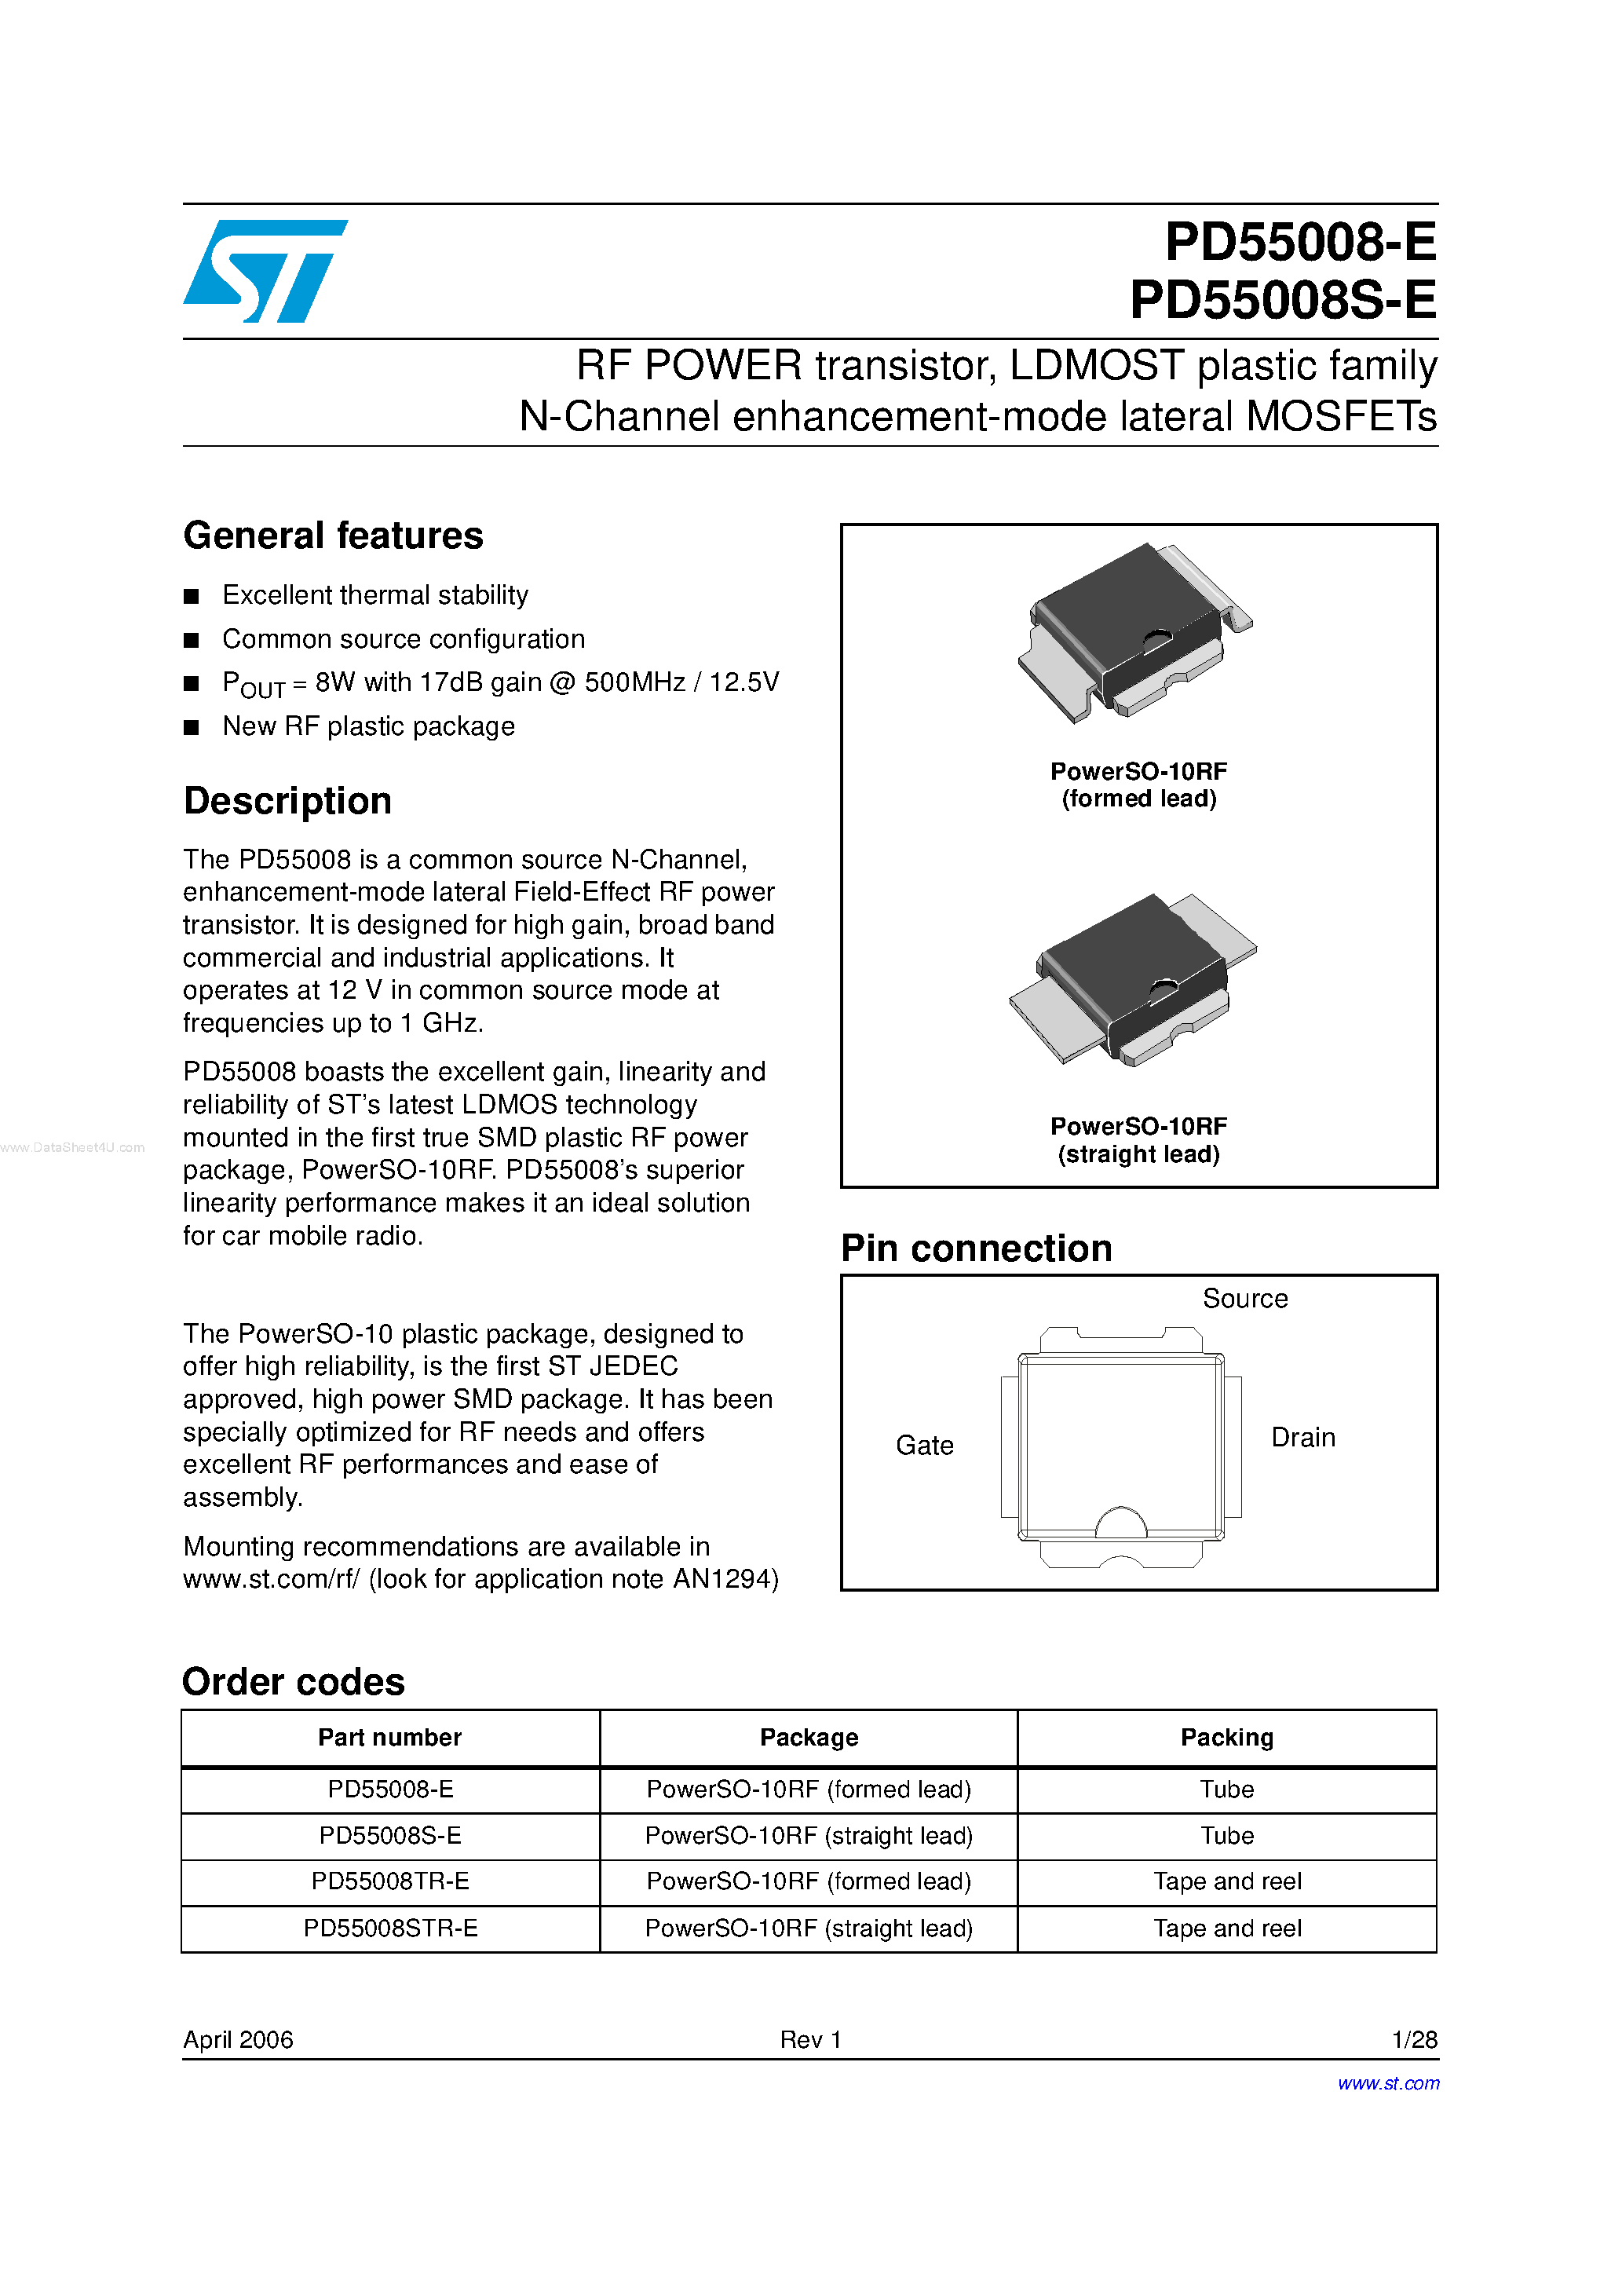 Даташит PD55008-E - RF POWER transistor / LDMOST plastic family N-Channel enhancement-mode lateral MOSFETs страница 1